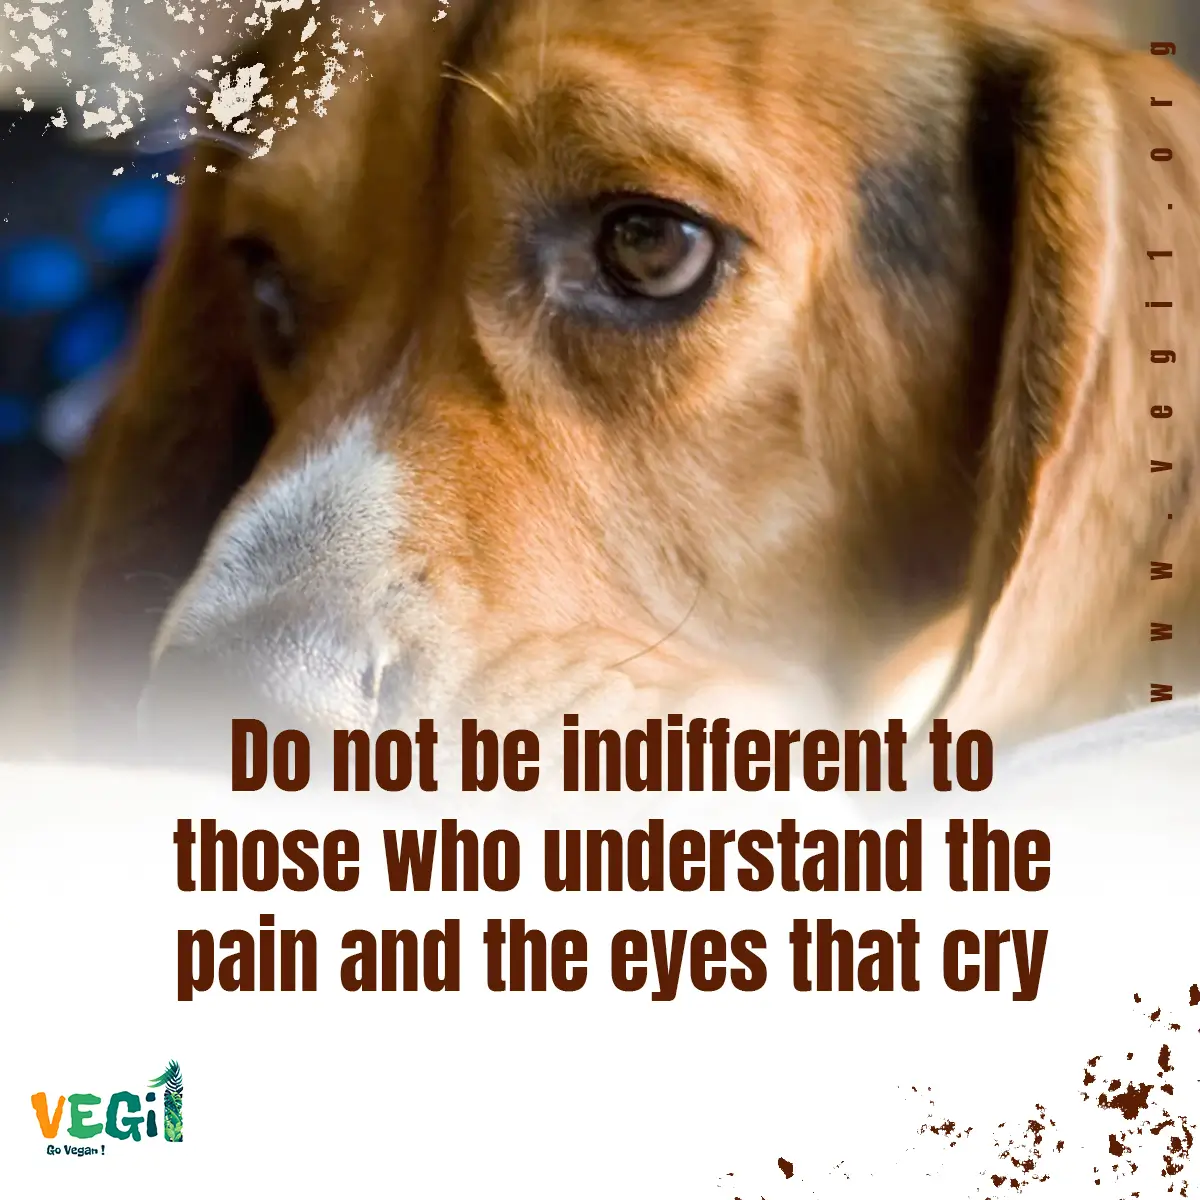 Do not be indifferent to those who understand the pain and the eyes that cry